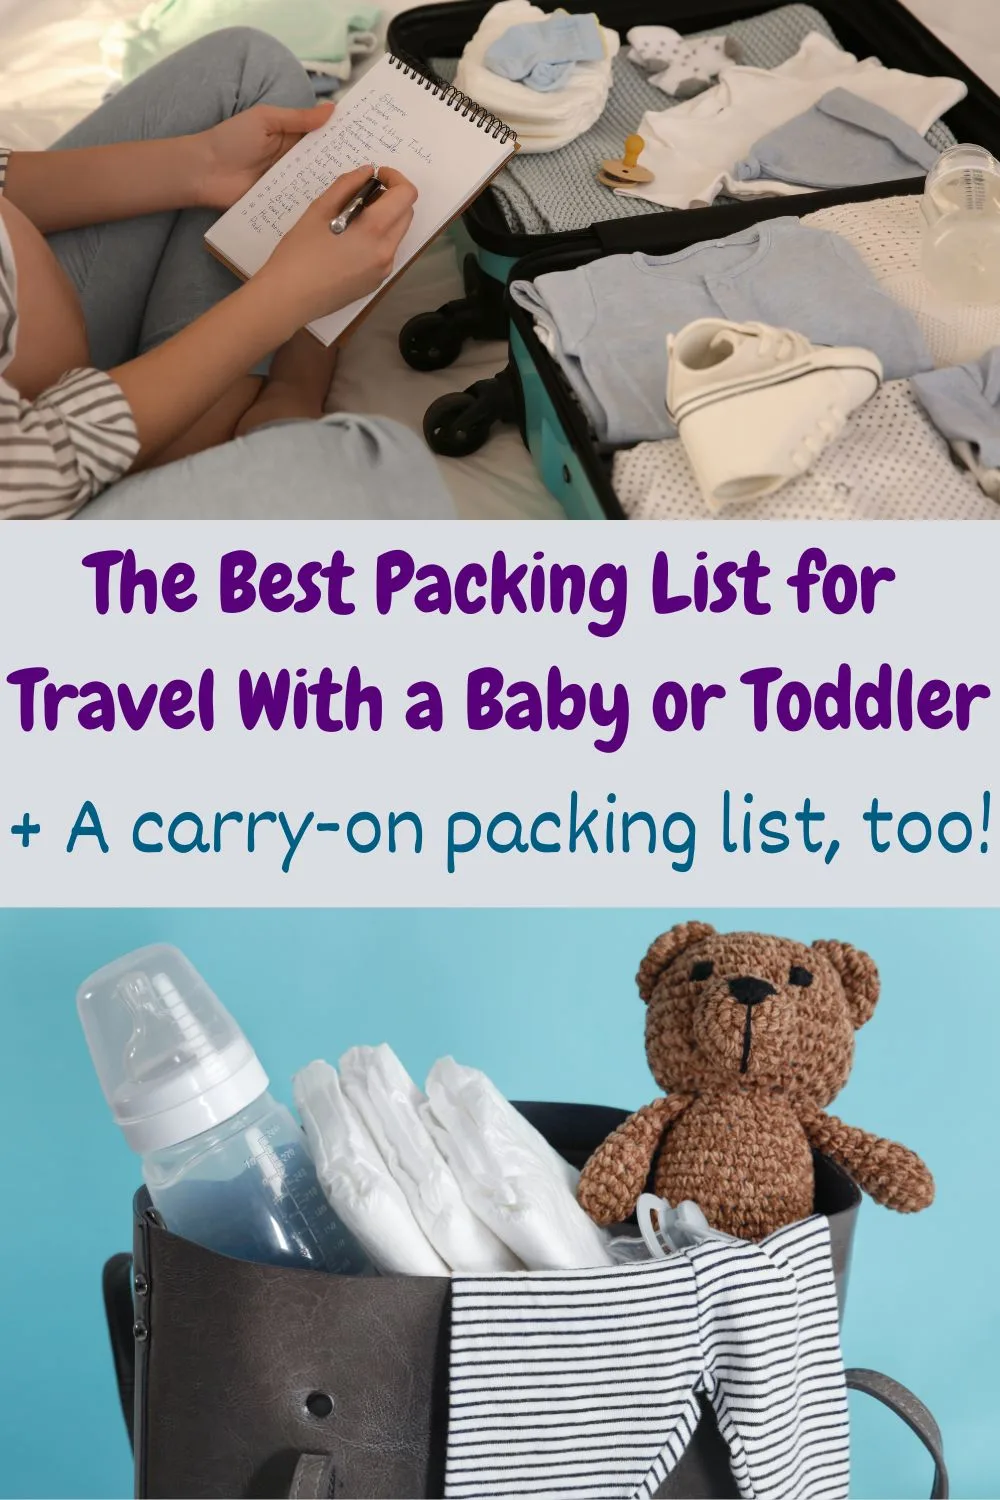 make it easy to get ready for vacations with this simple, complete packing list for traveling with a baby or toddler. a complete carry-on check list, helps, too.